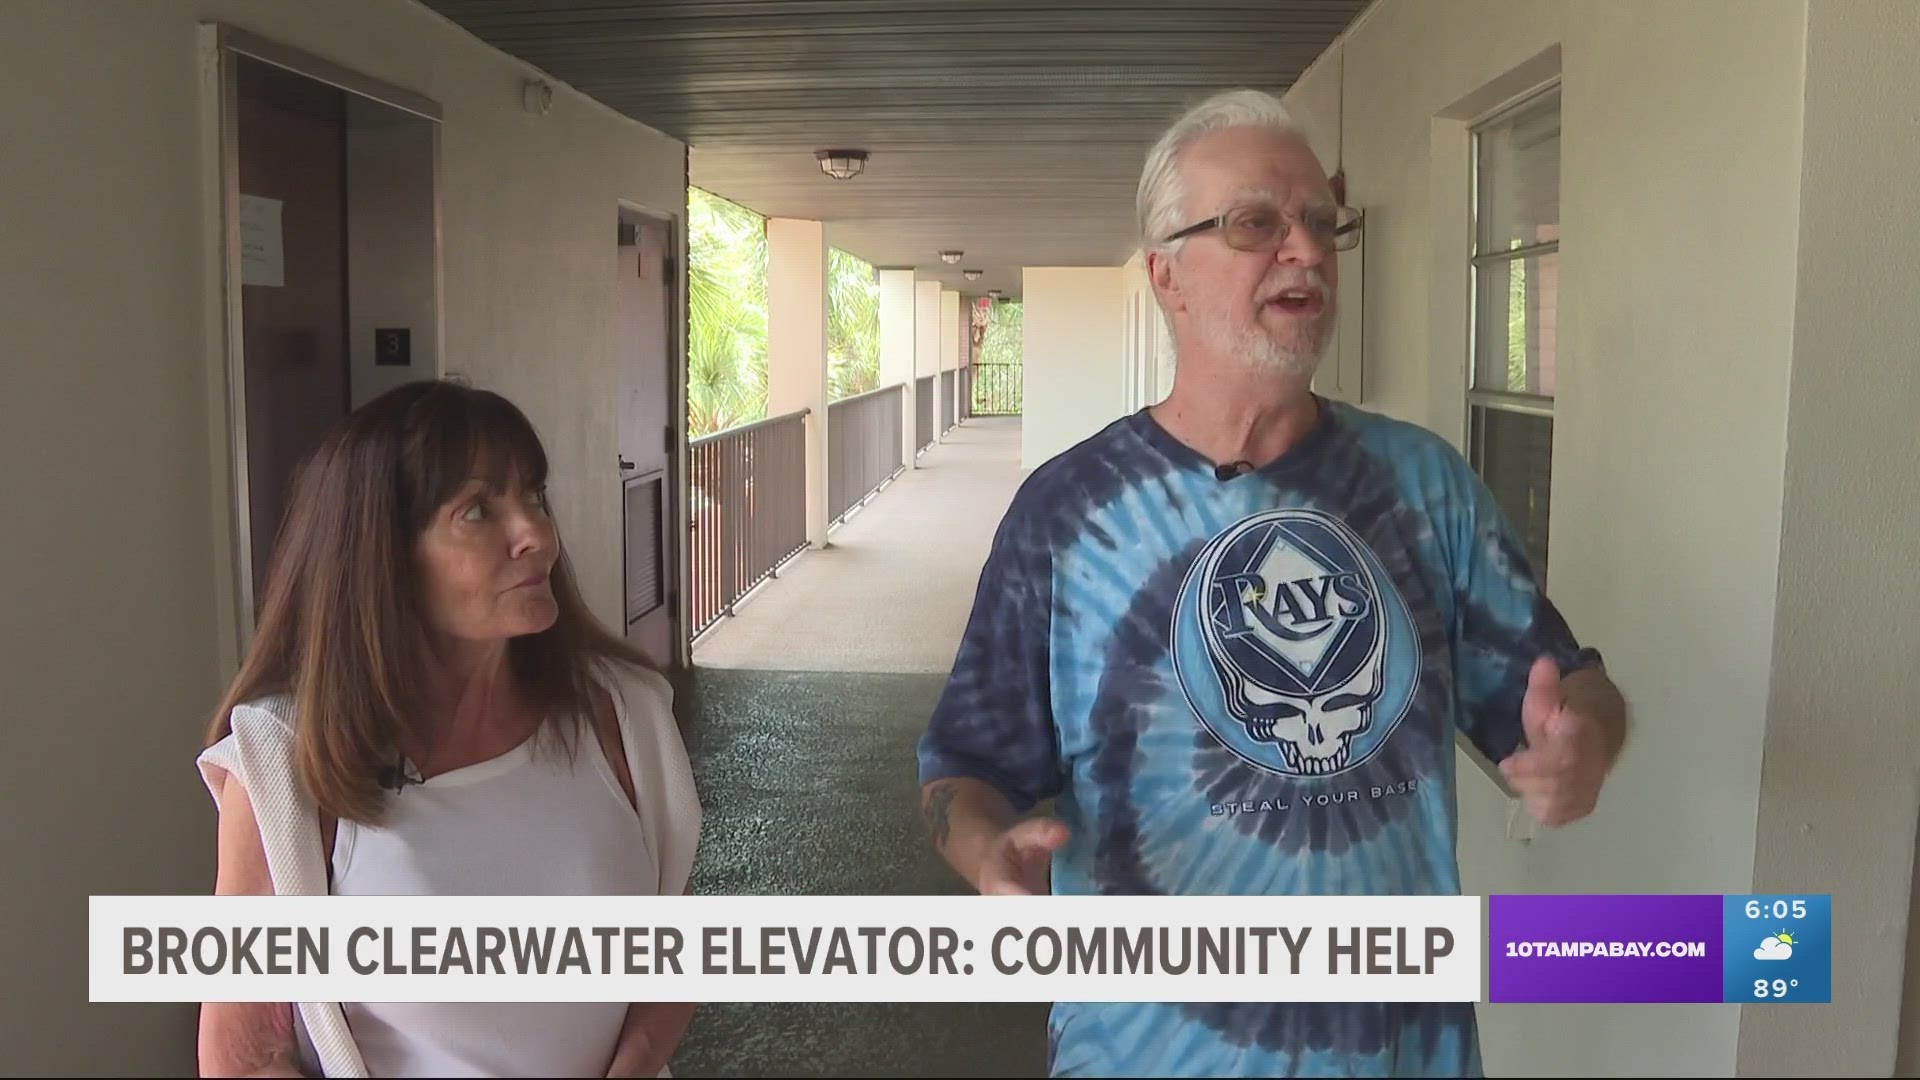 A Clearwater condo complex elevator has been broken since May 10. For the elderly residents on the top floors, every trip up and down the stairs is difficult.